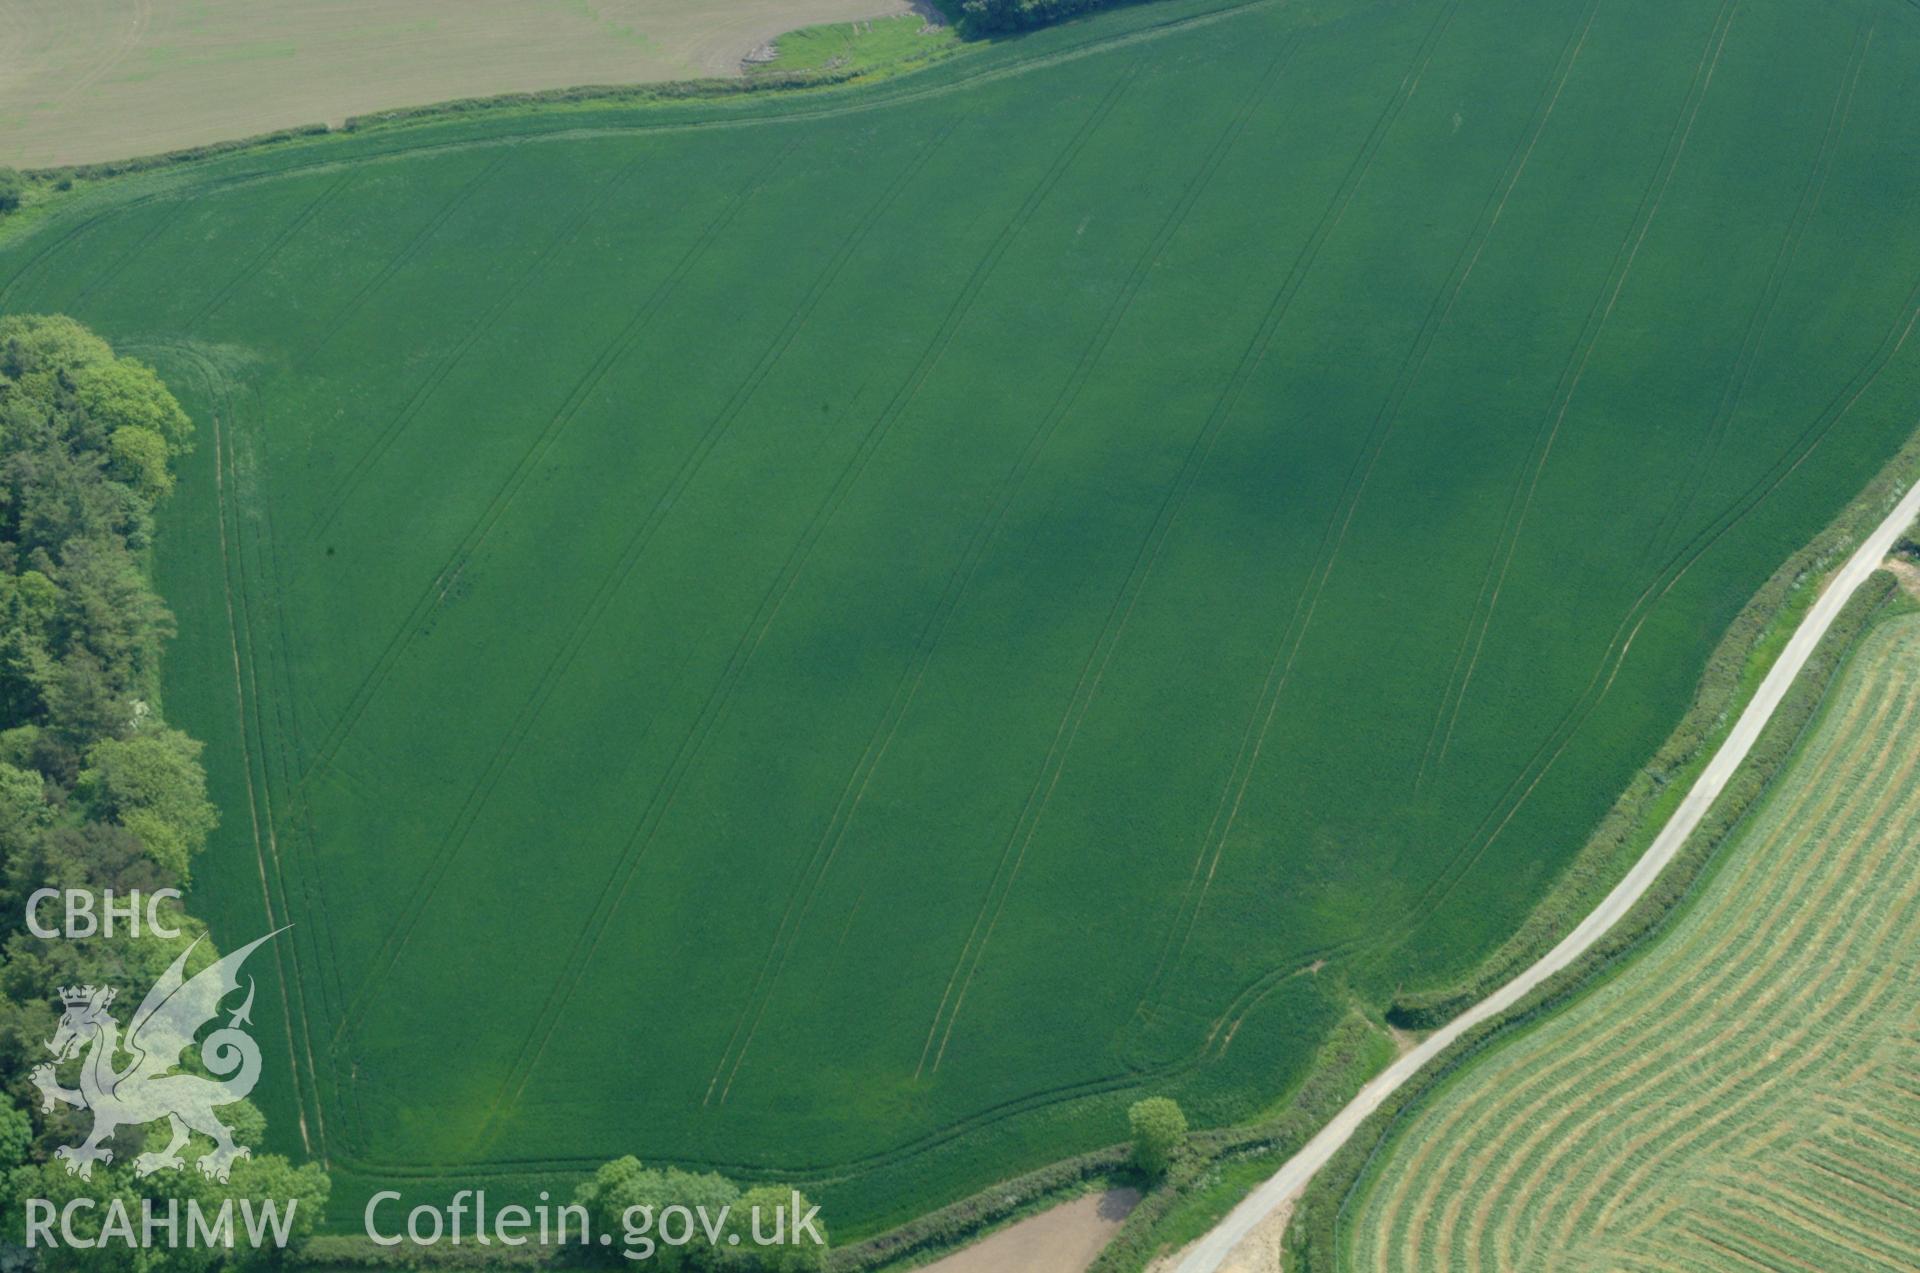 RCAHMW colour oblique aerial photograph of possible cropmarked enclosure at Landigwinnet, north-east of Carew taken on 24/05/2004 by Toby Driver